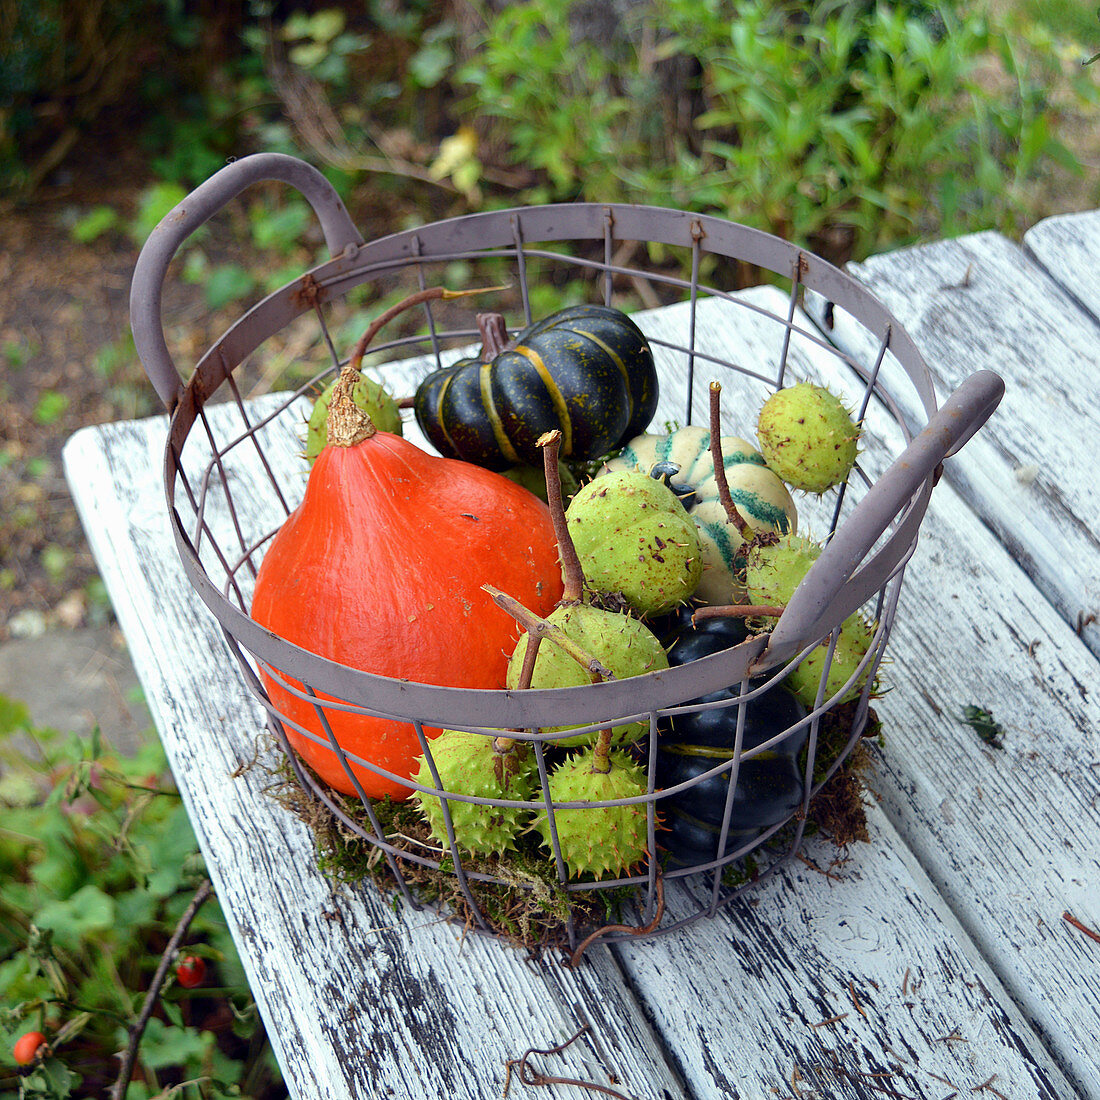 Pumpkins and chestnuts in a wire basket